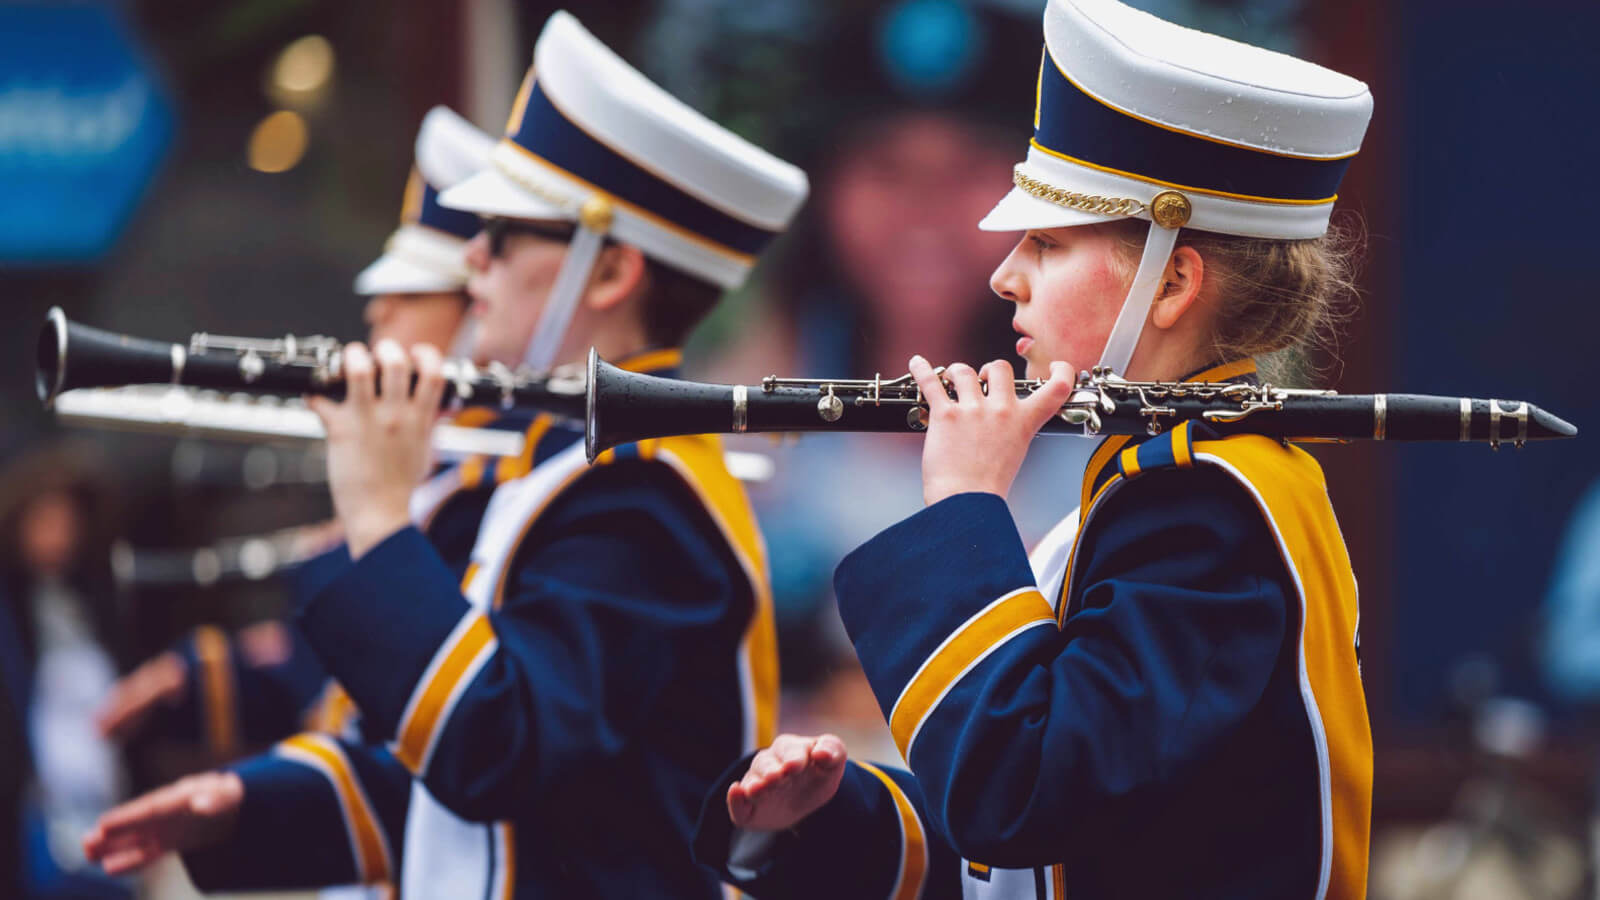 students march in a band wearing blue and gold uniforms and playing instruments